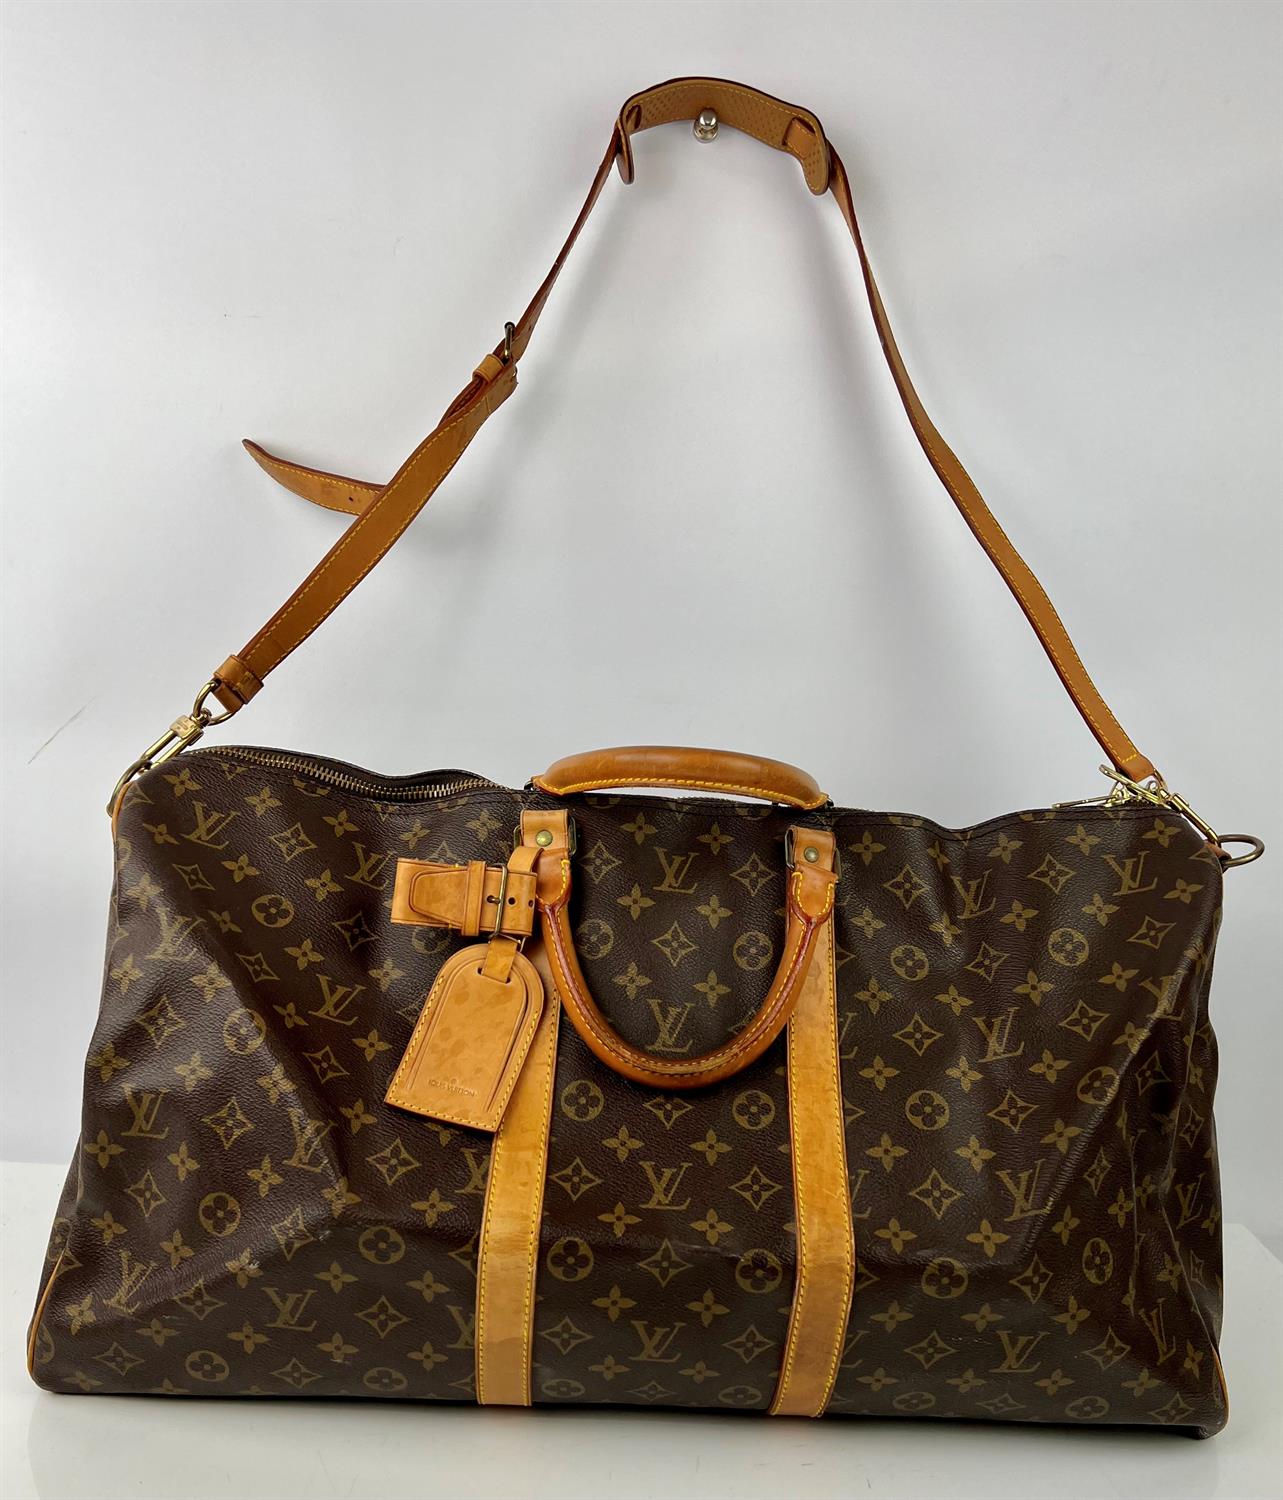 LOUIS VUITTON Monogram Keepall Bandouliere 60 Boston Travel bag with long strap and luggage tag.